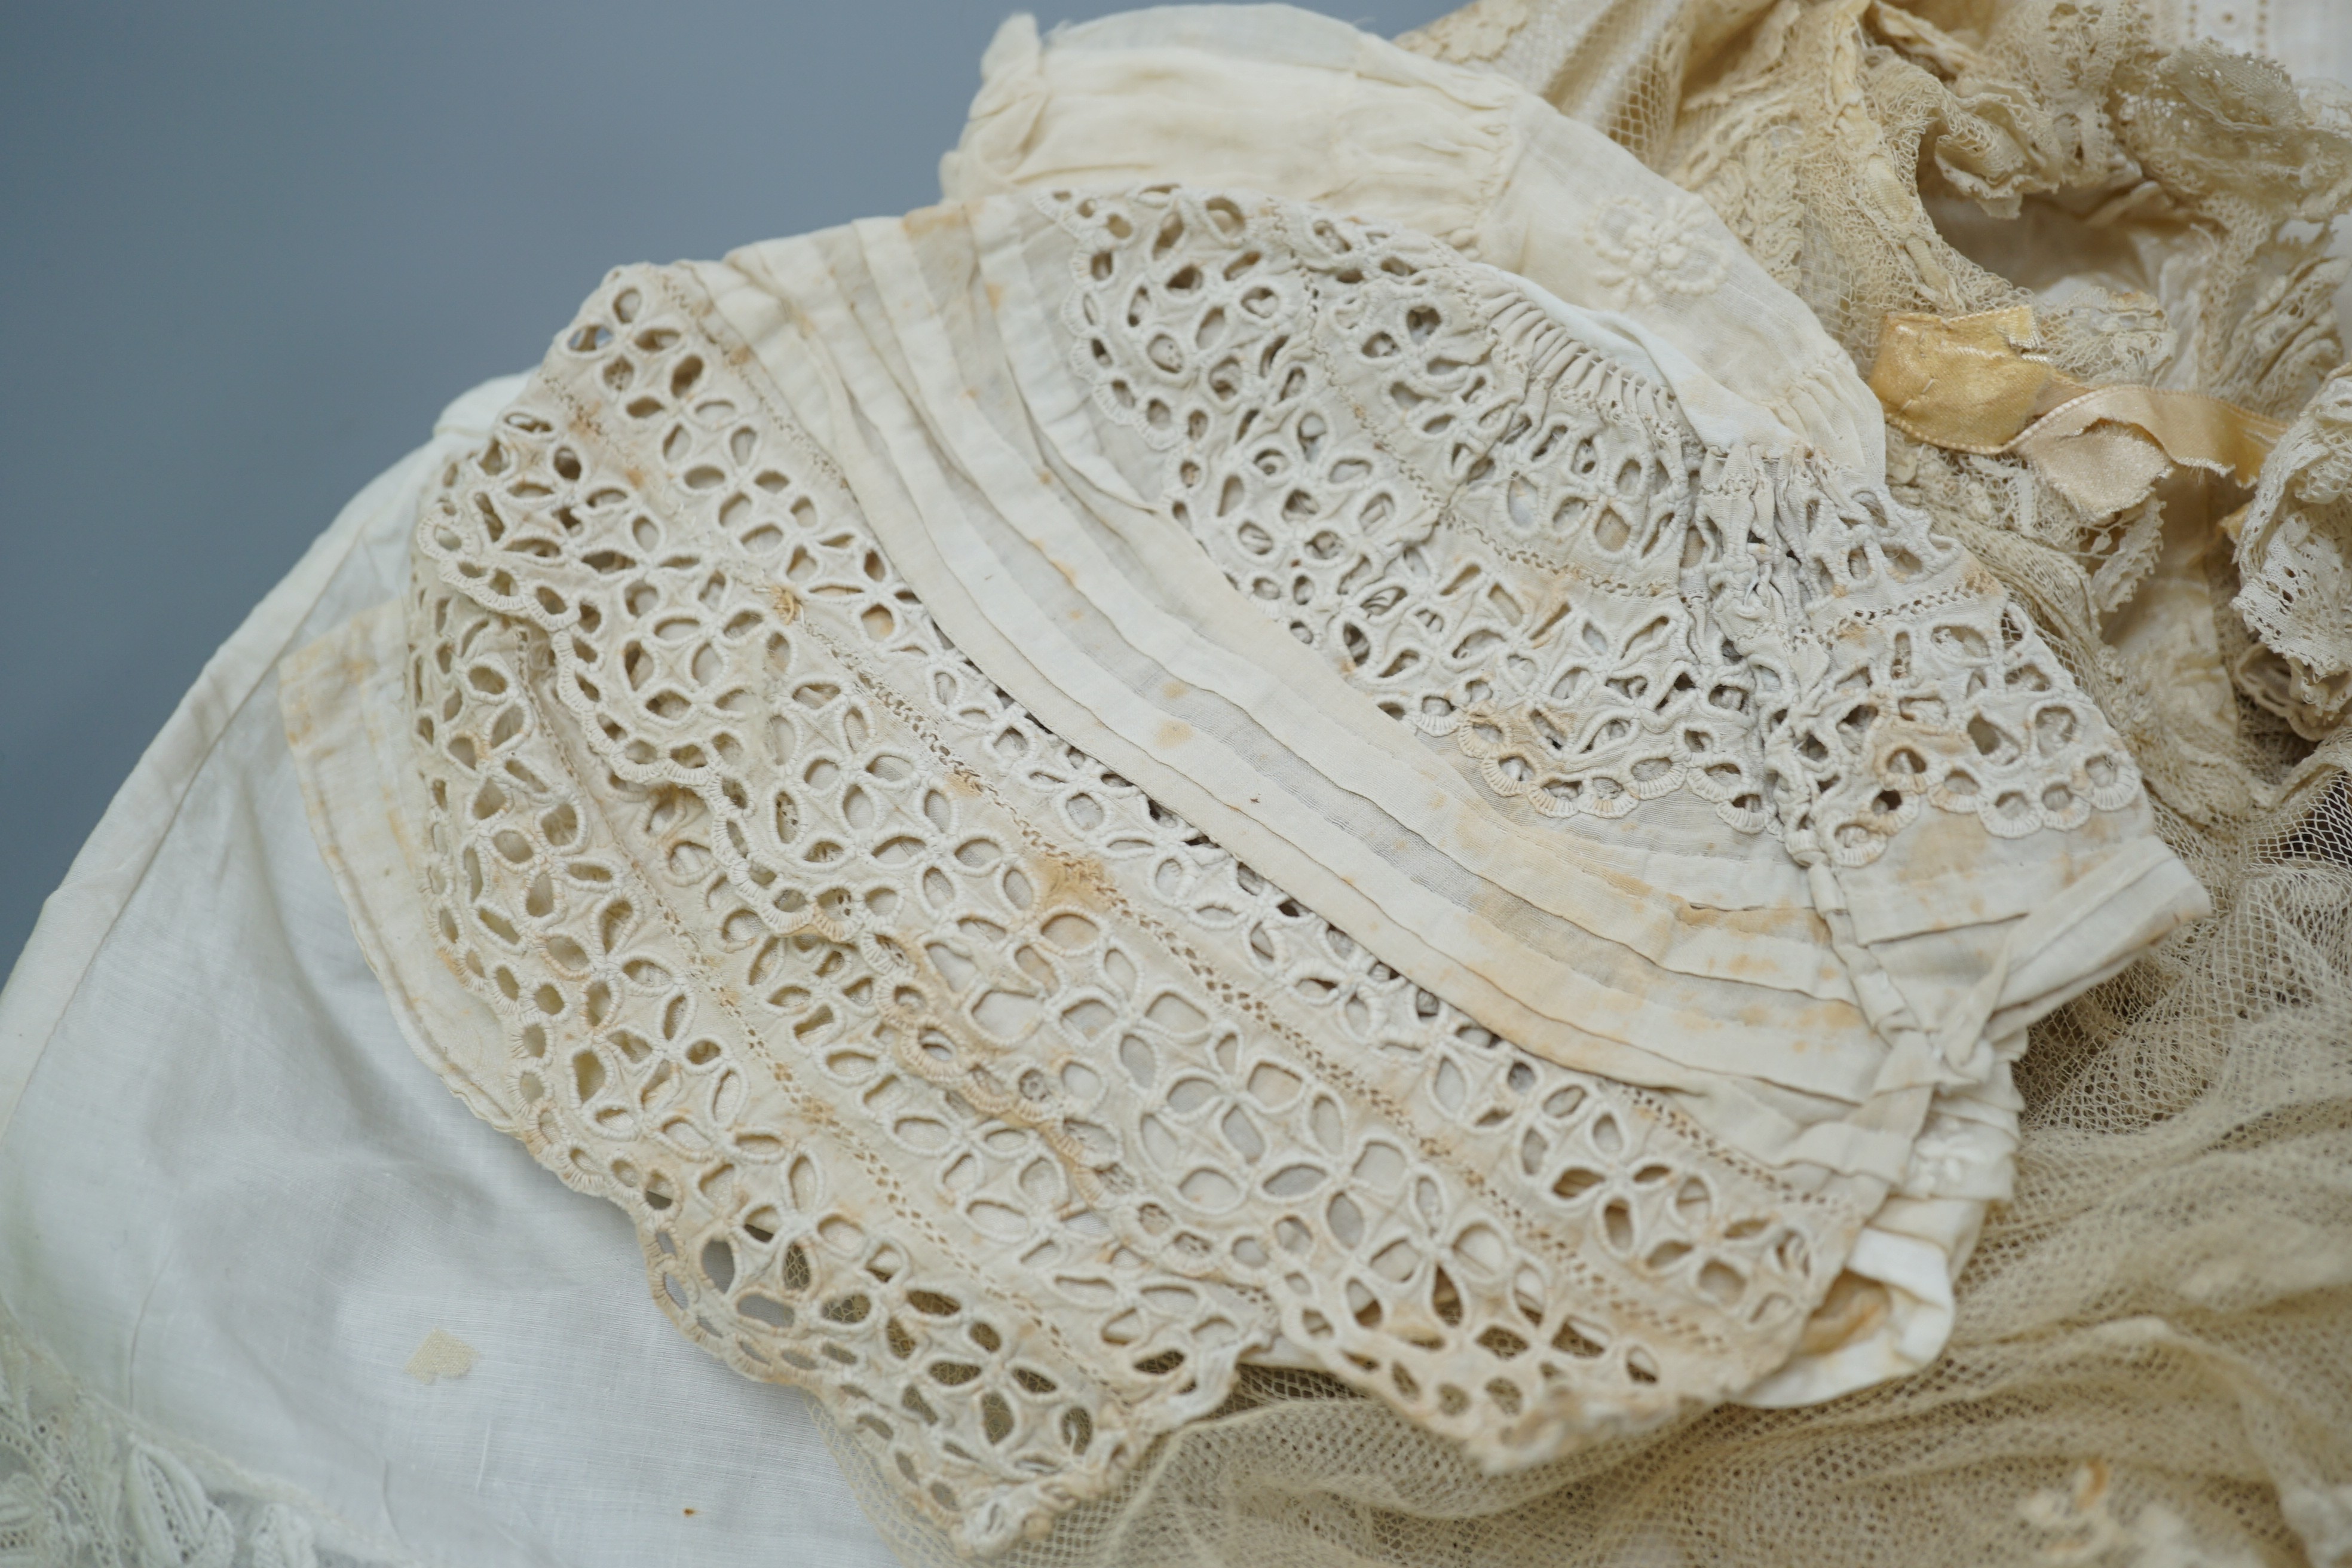 A collection of 19th century babywear, lace and cutwork bonnets and a christening bonnet and veil